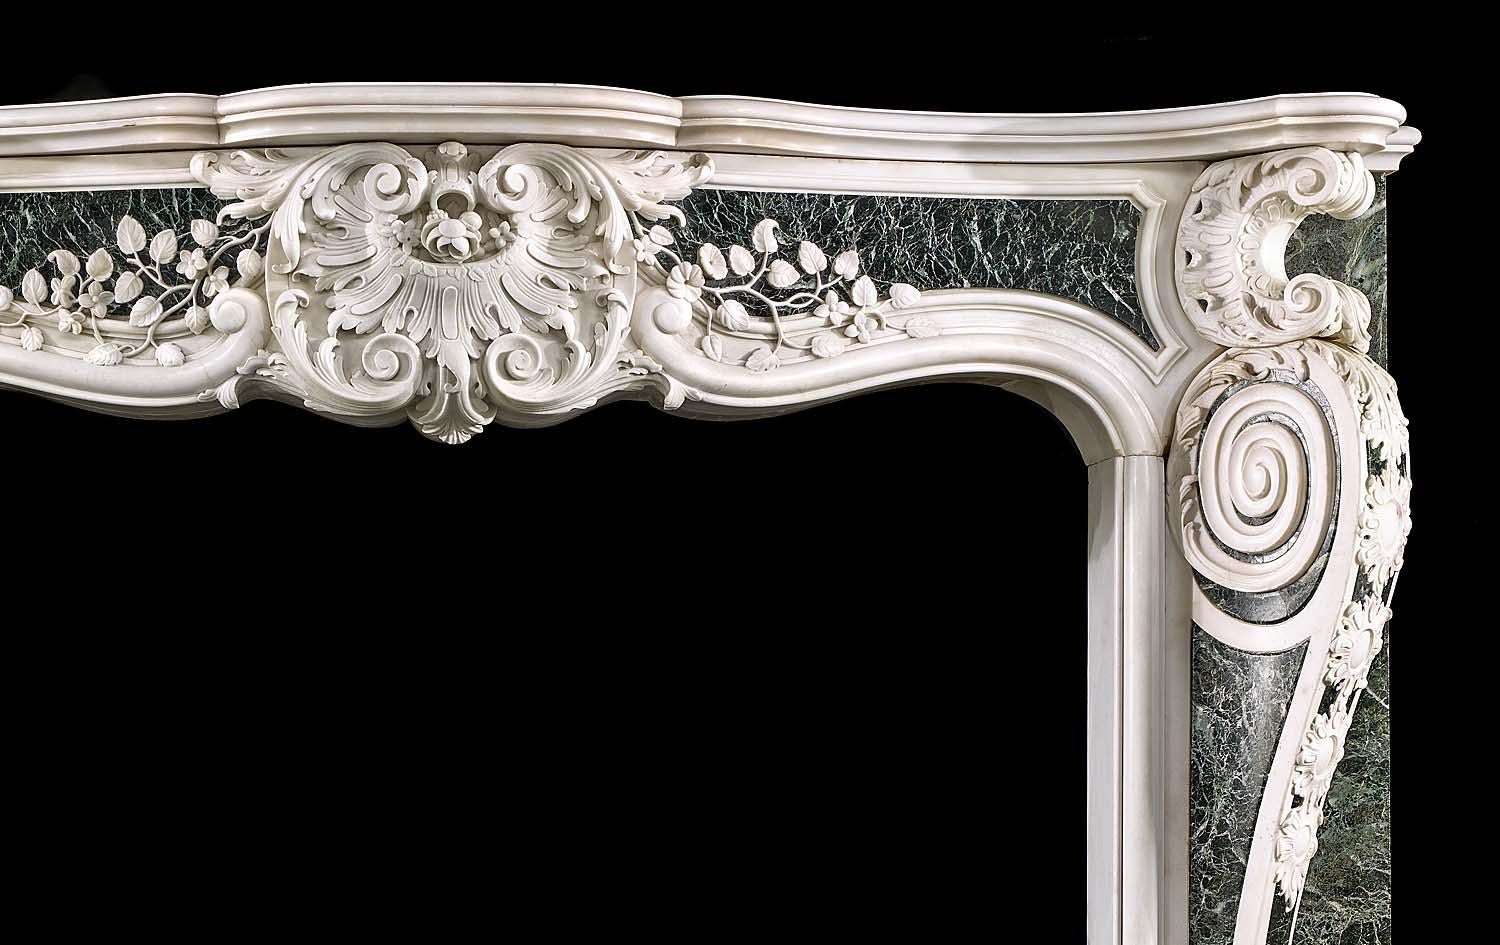 English George II Rococo Chimneypiece in White Statuary and Verde Antico Marble For Sale